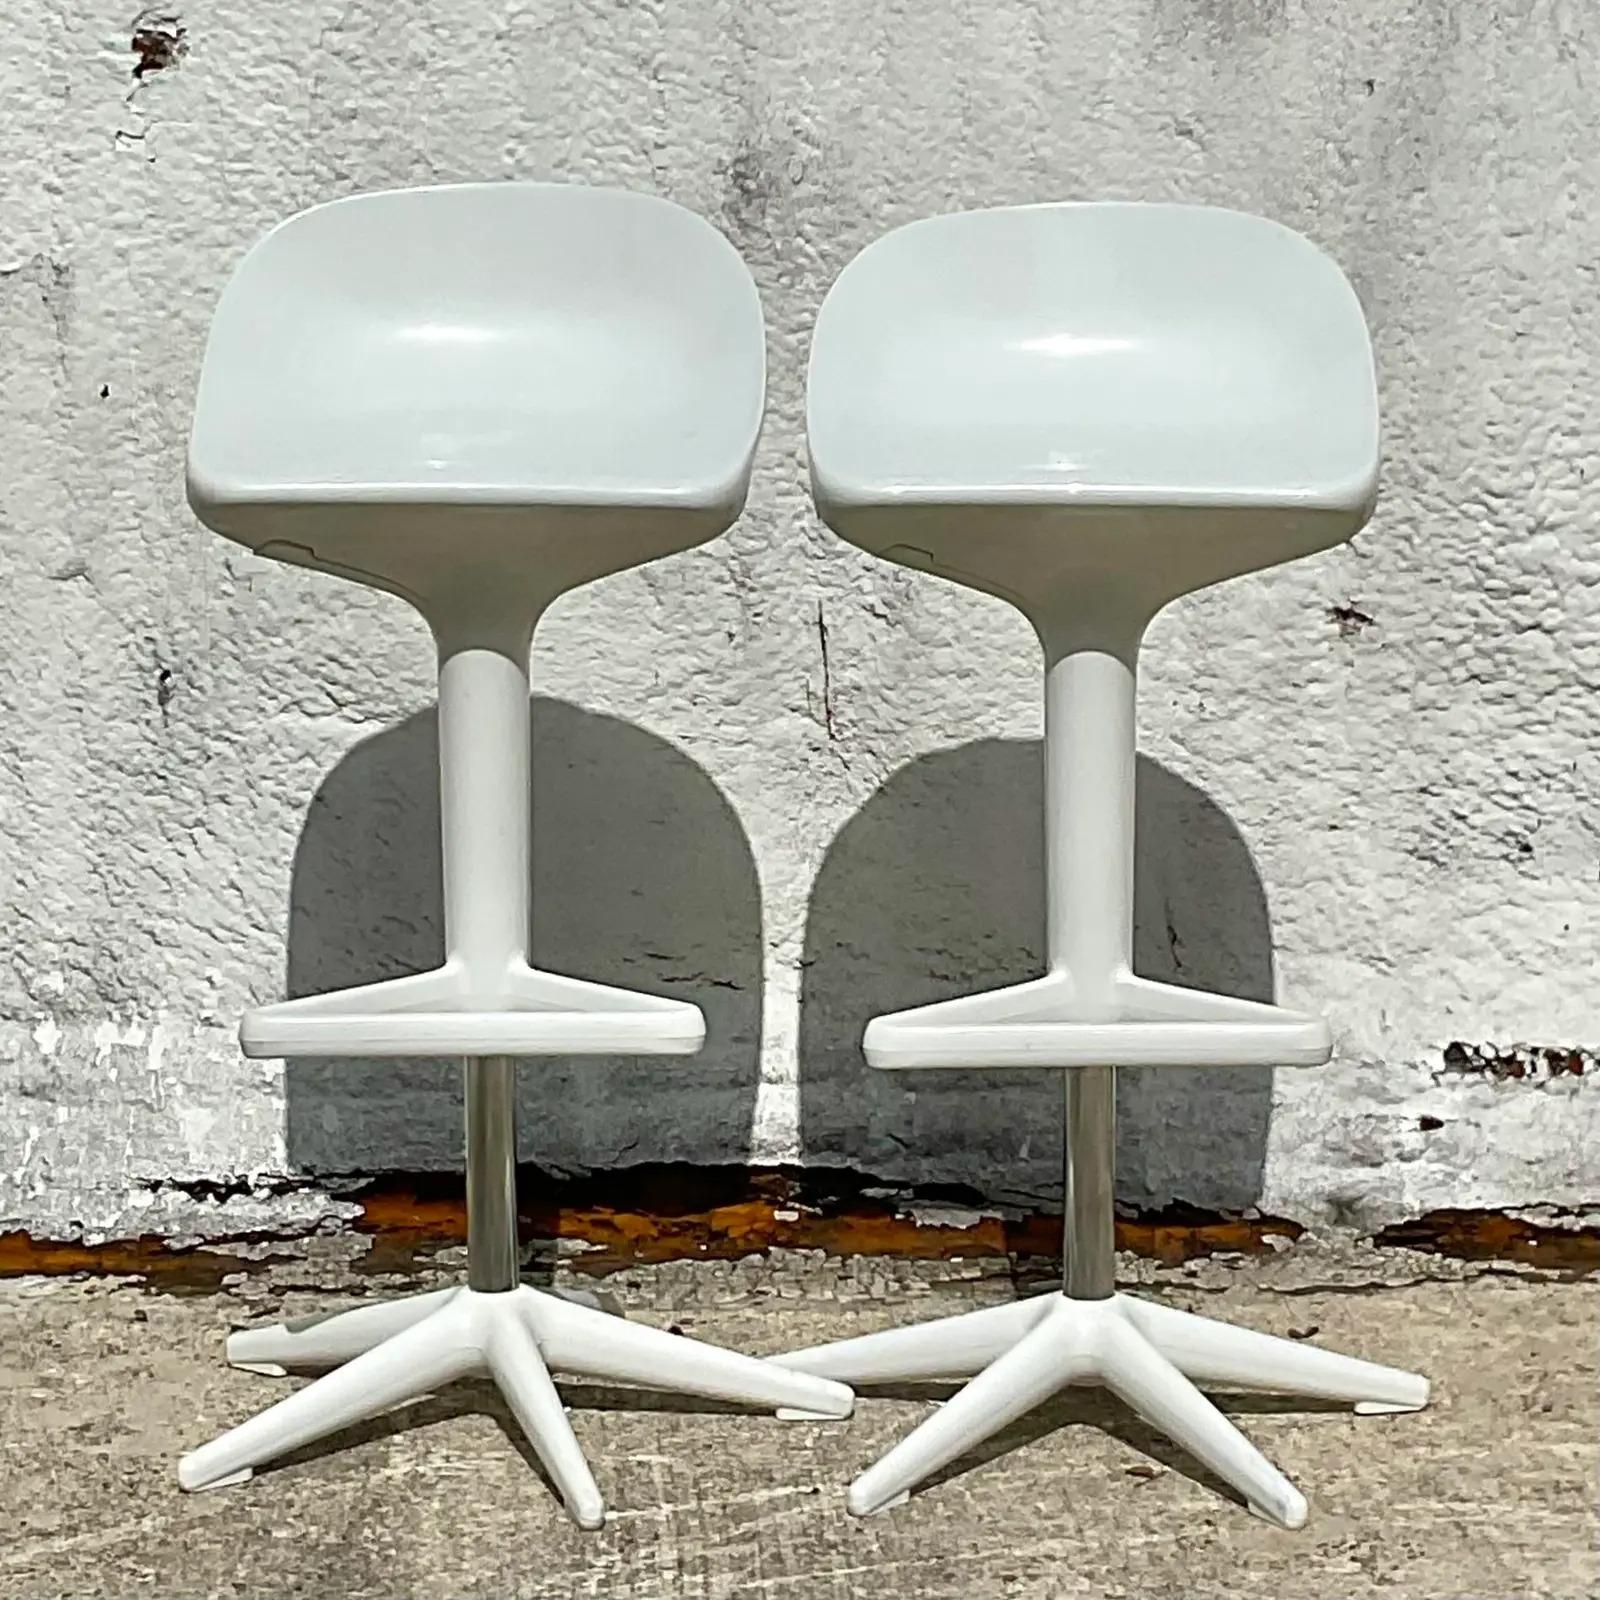 Vintage Contemporary Spool Stool by Antonio Citterio for Kartell - a Pair For Sale 1